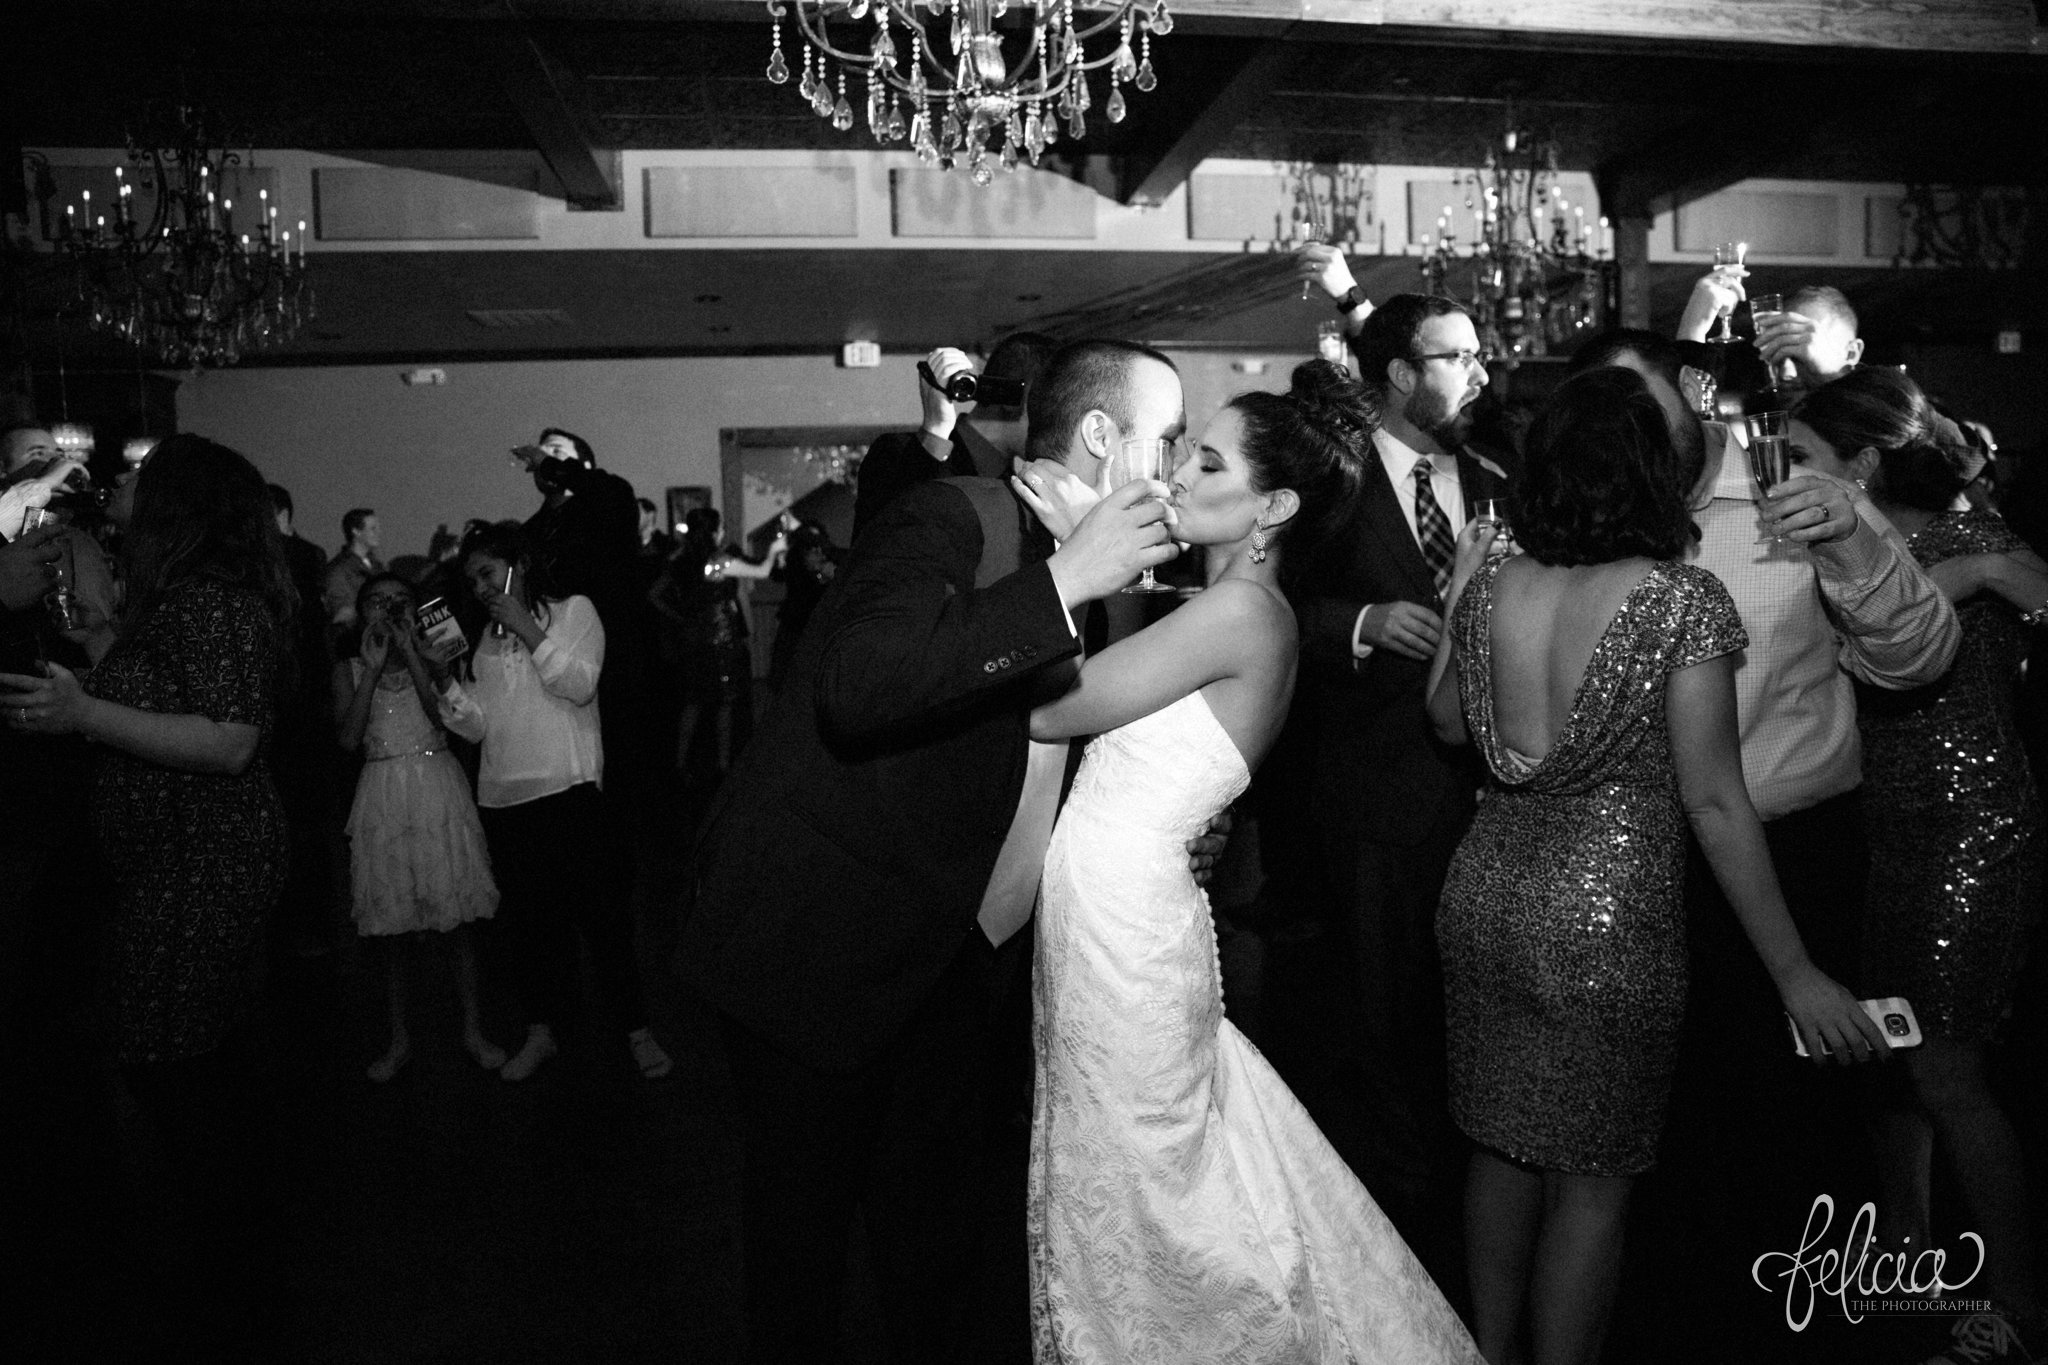 The Aspen Room | The Stanley | Lees Summit | wedding | wedding photos | wedding photography | images by feliciathephotographer.com | chic | New Years Eve Wedding | Combatant Gentlemen | Hollywood Drama | wedding reception | wedding venue | dance floor | candid | black and white | bride and groom dancing | dance floor kiss | reception party 